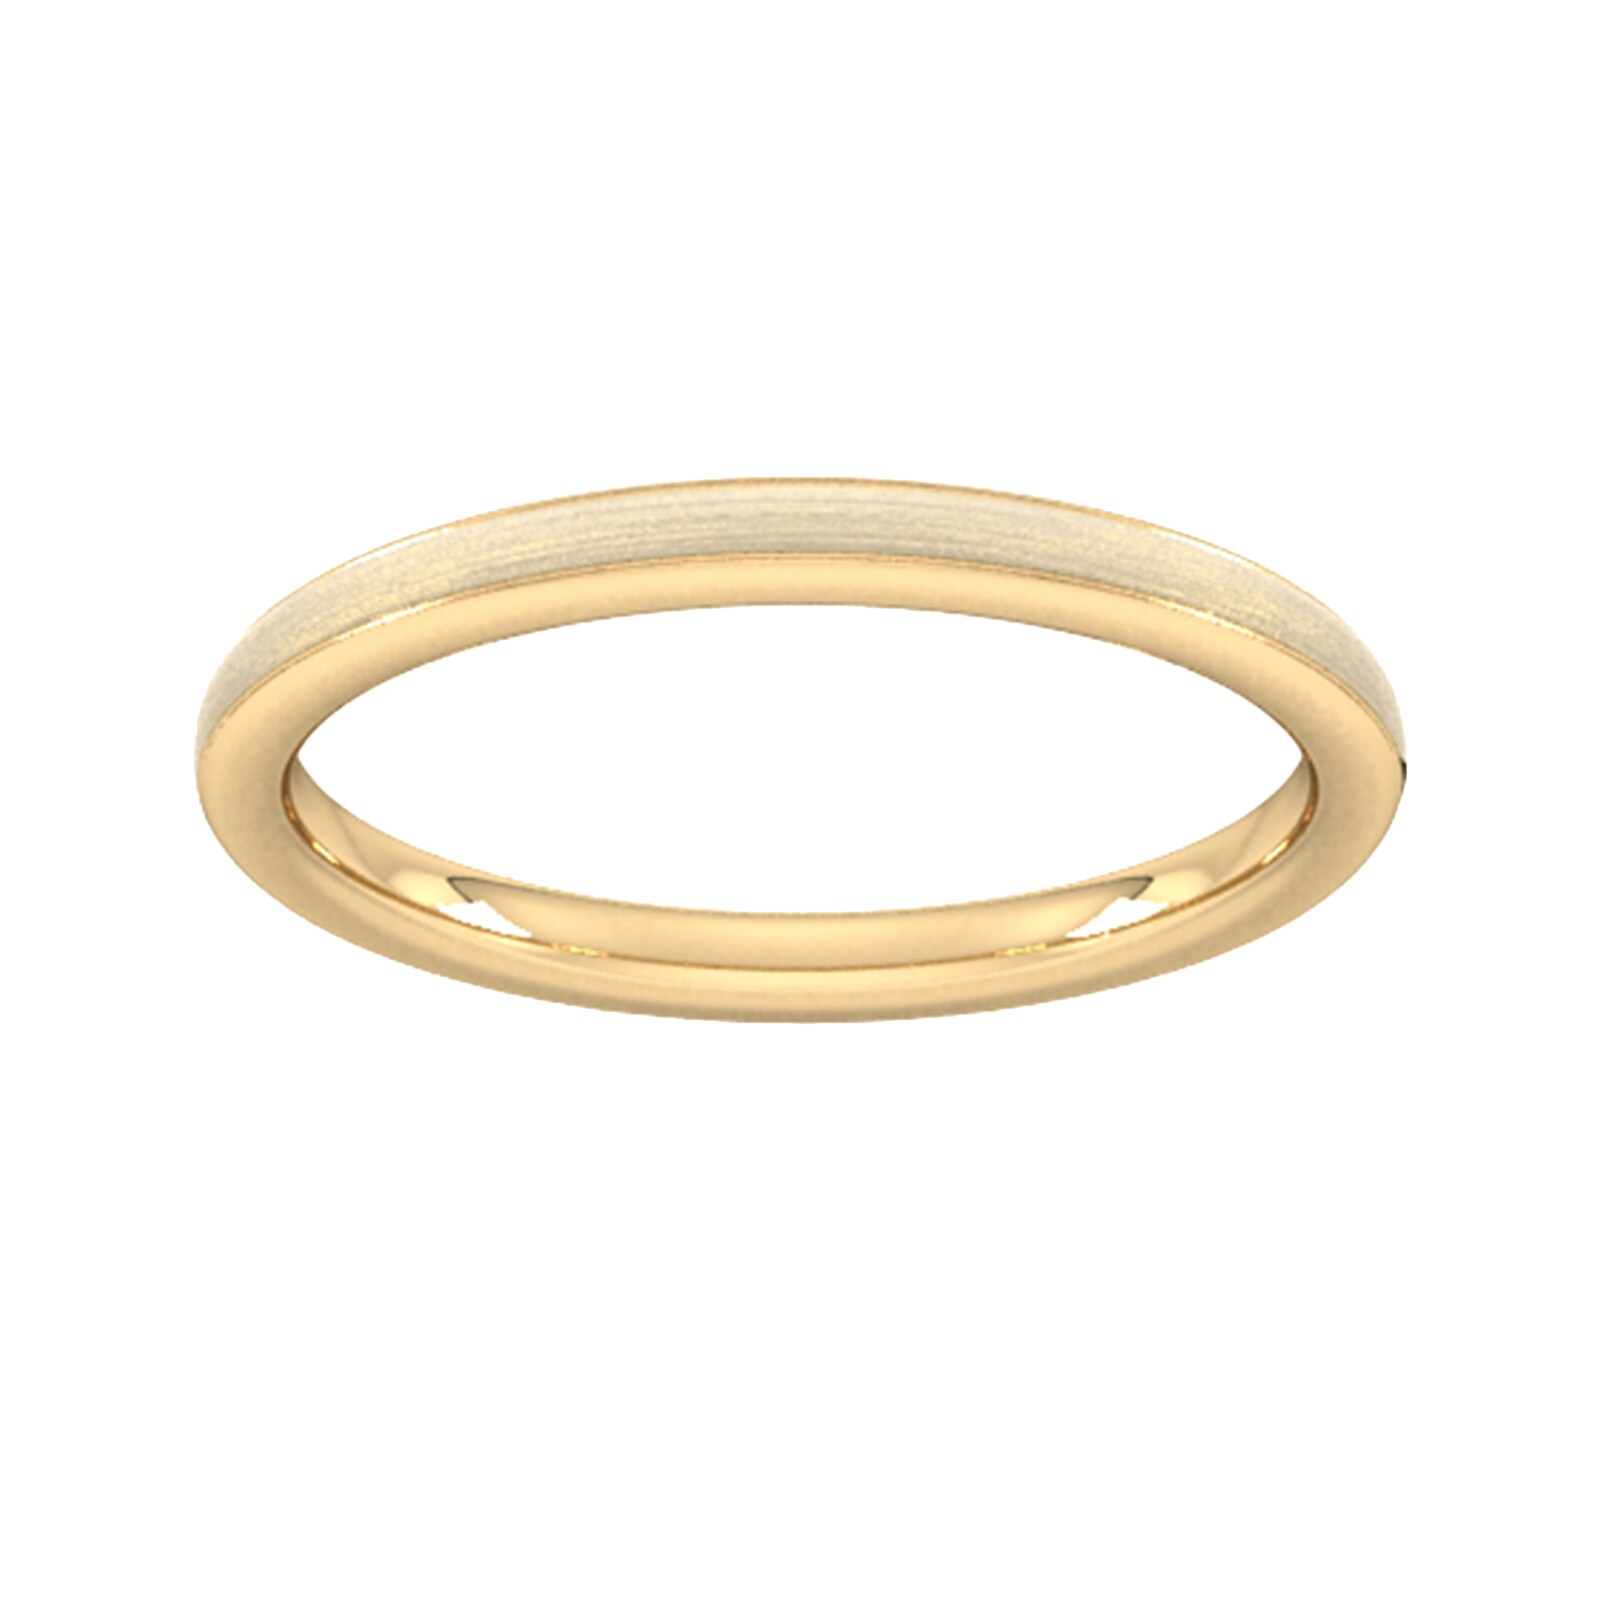 2mm Slight Court Extra Heavy Matt Centre With Grooves Wedding Ring In 18 Carat Yellow Gold - Ring Size W